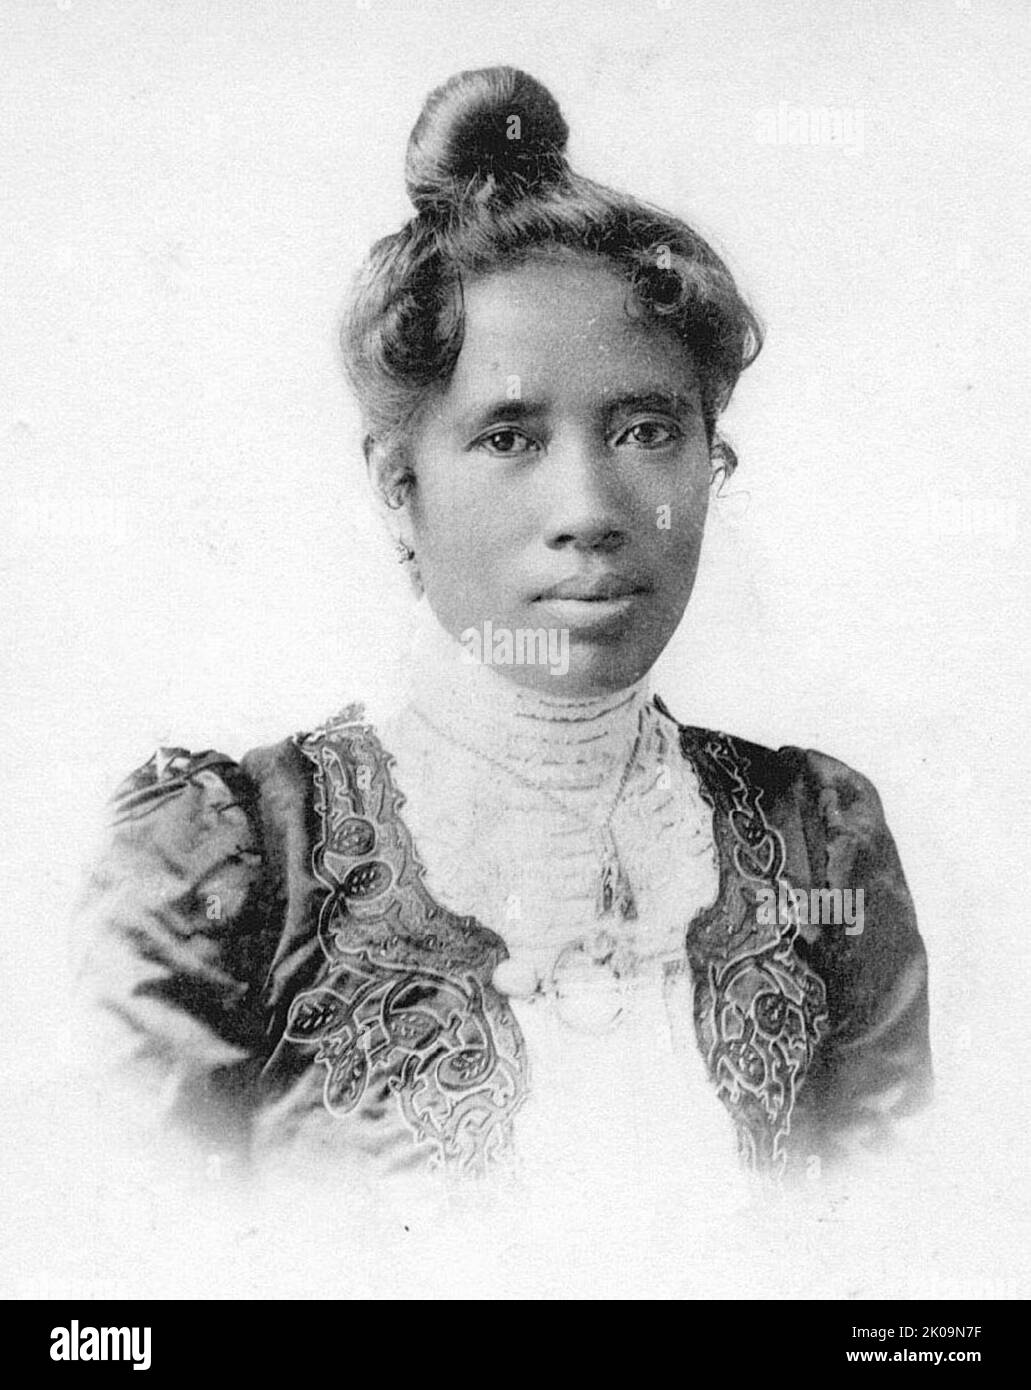 Ranavalona II (1829 - 13 July 1883) was Queen of Madagascar from 1868 to 1883, succeeding Queen Rasoherina, her first cousin. She is best remembered for Christianizing the royal court during her reign. Stock Photo